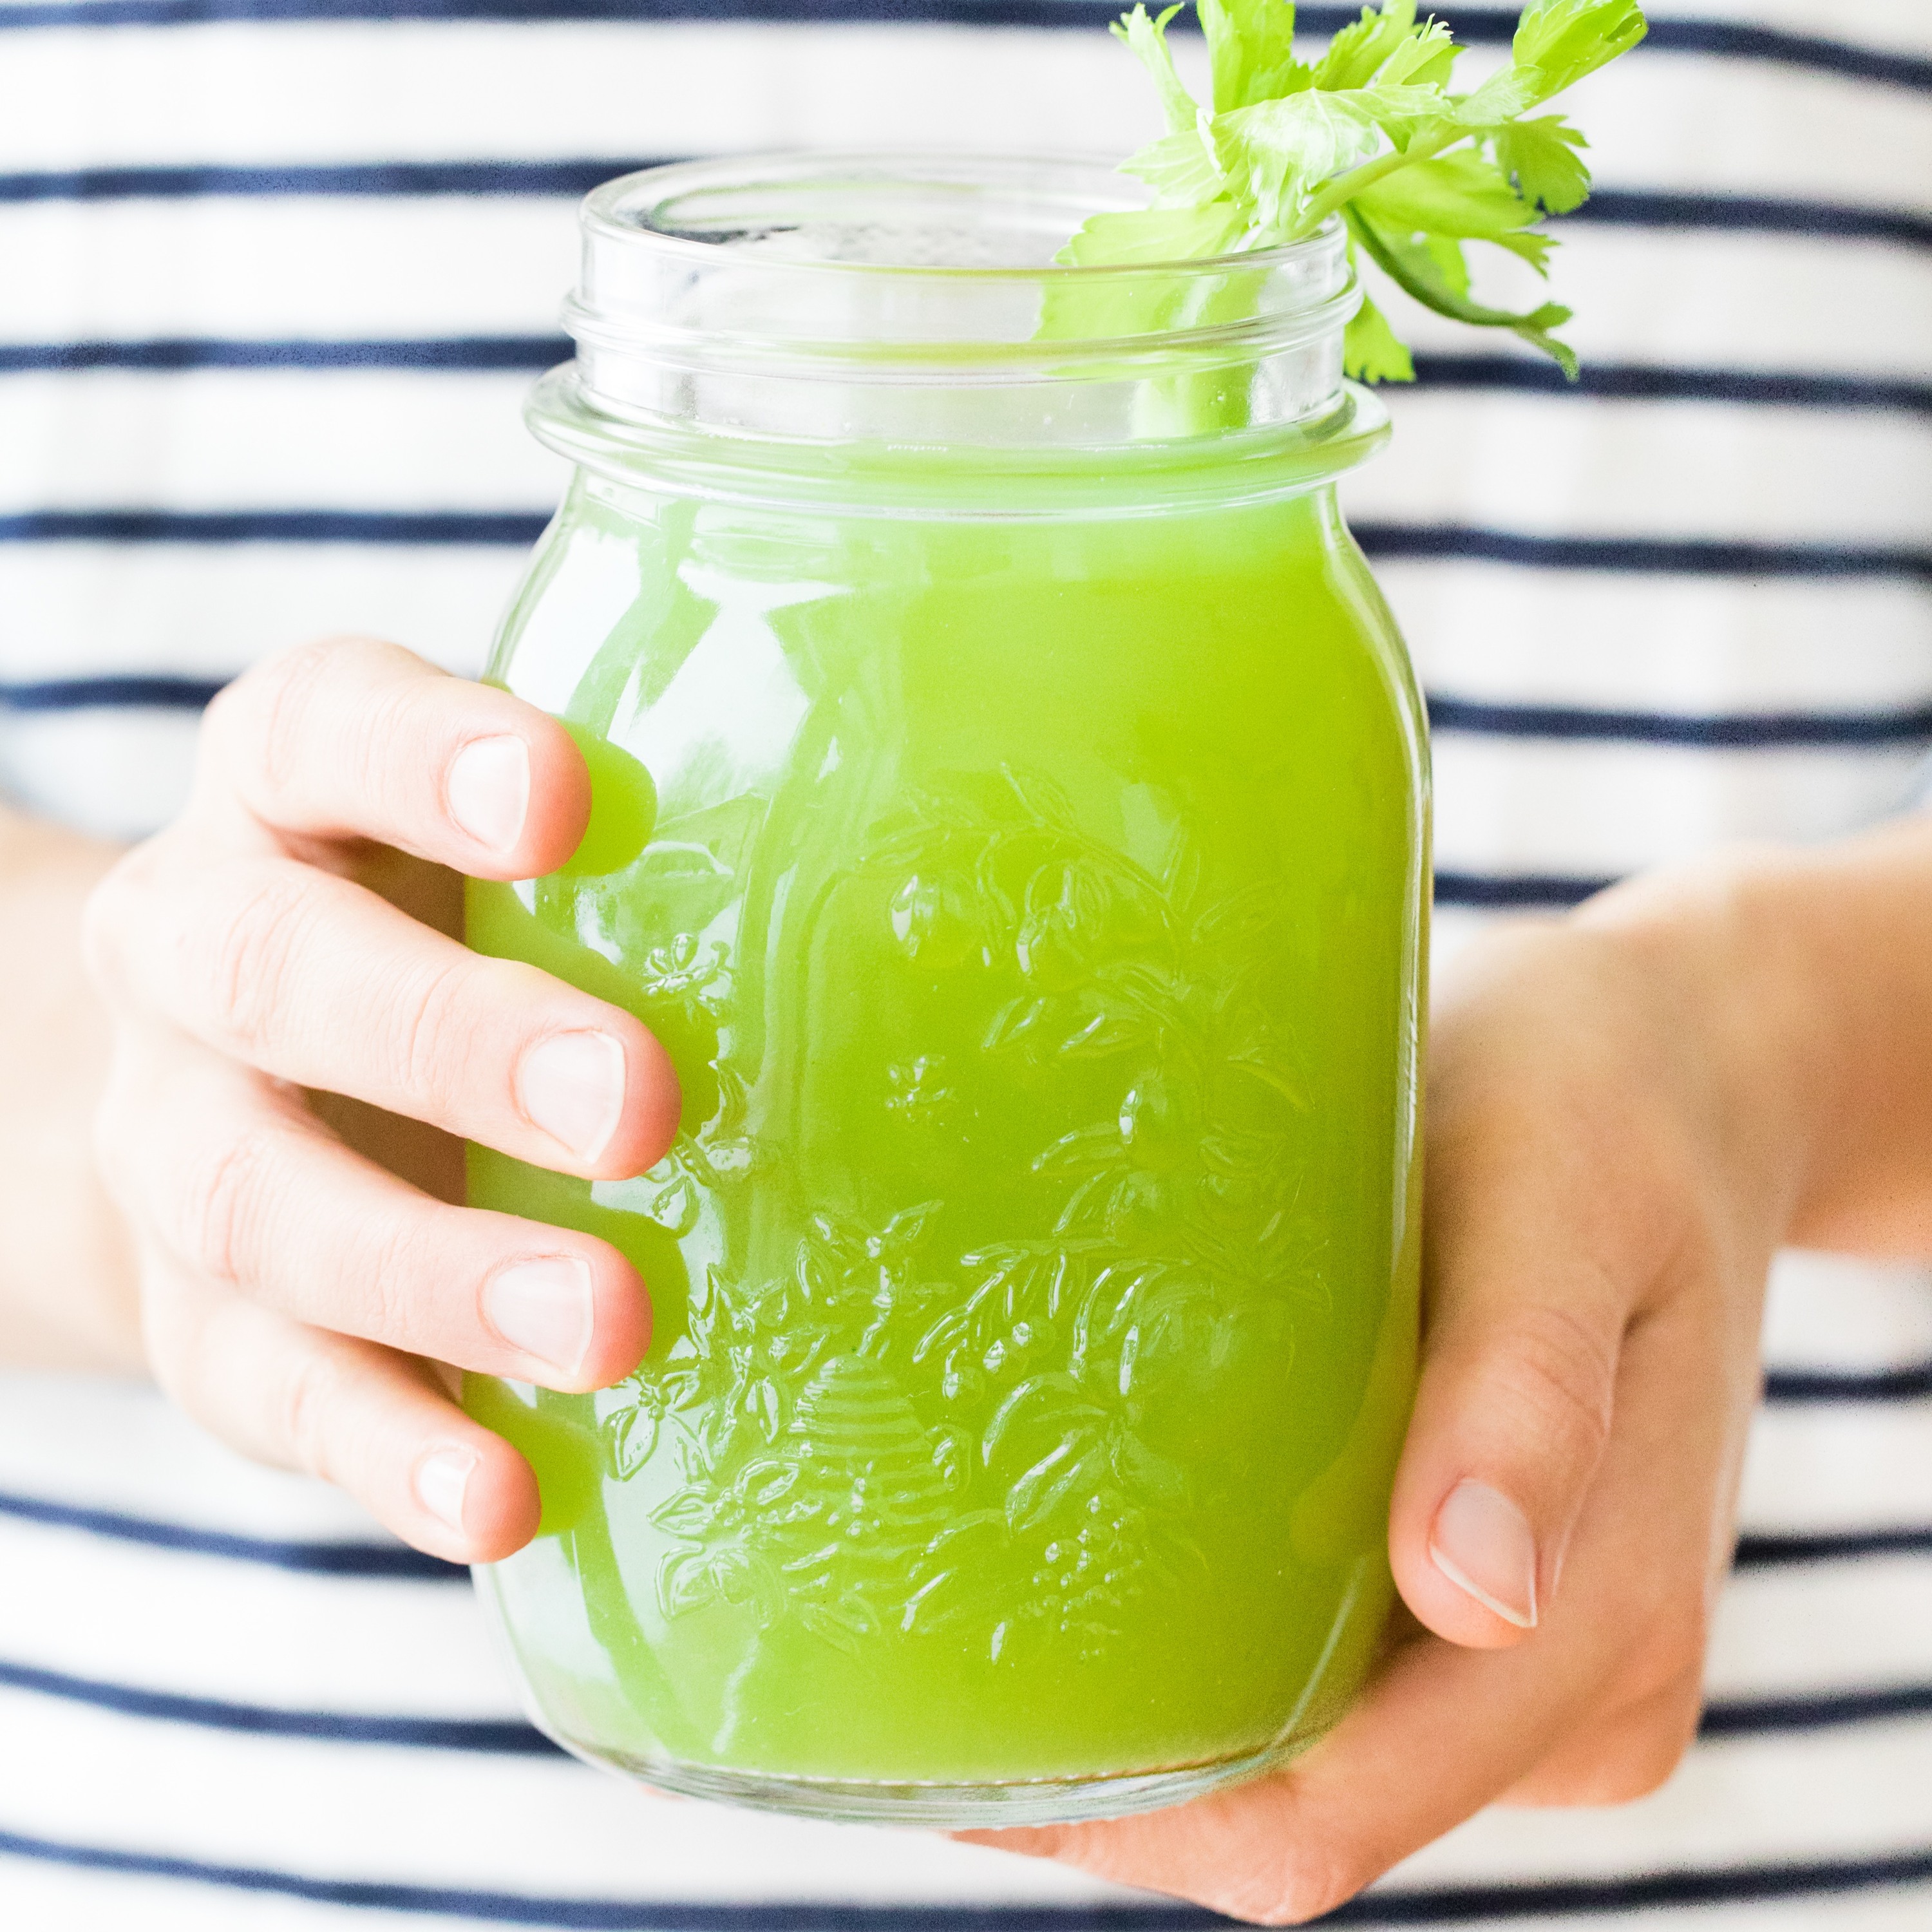 Celery Juice For Eczema & Other Skin Conditions - Radio Show Archive